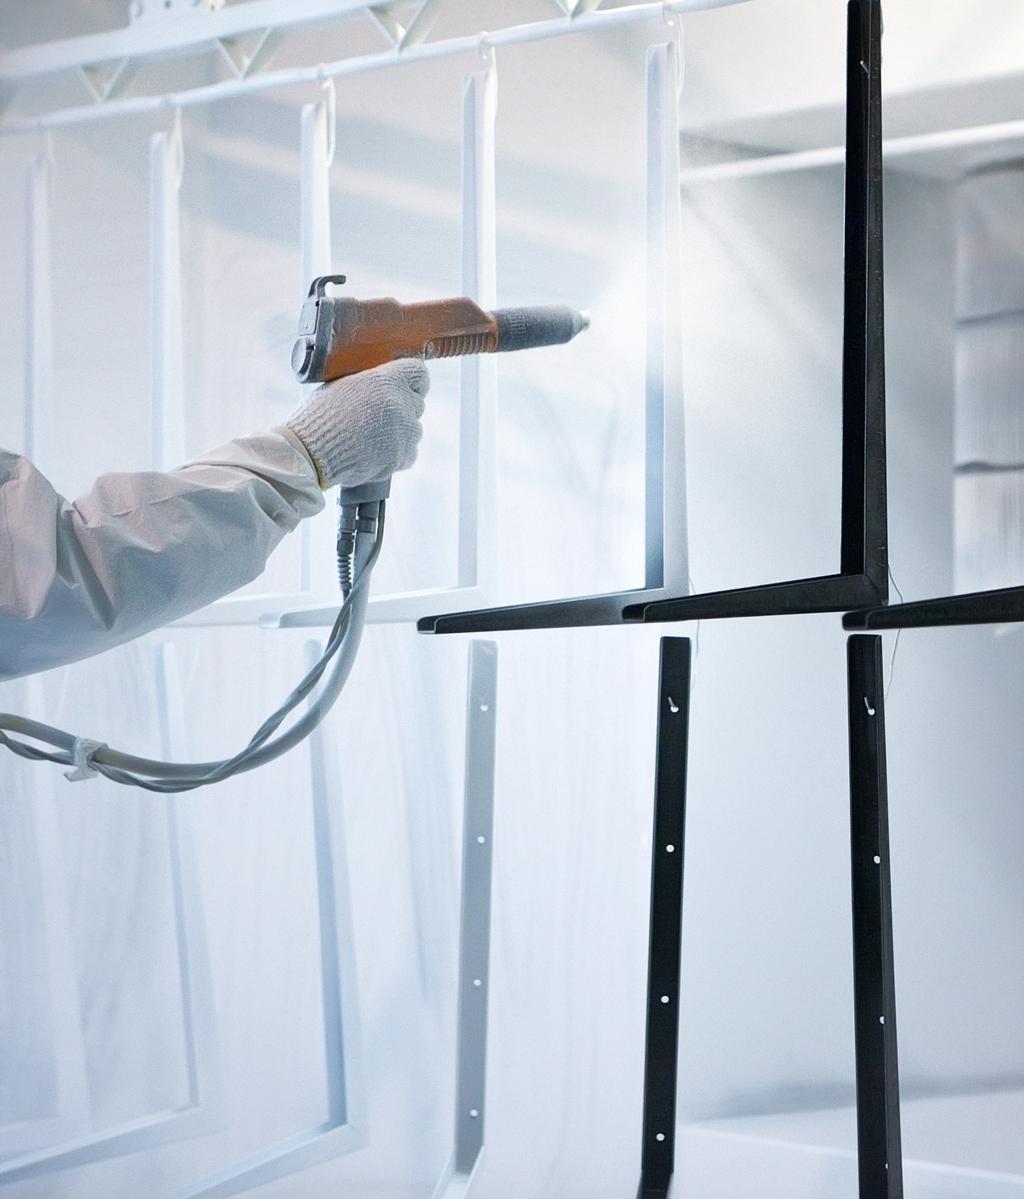 F irst pioneered in the 1950s, powder coating has evolved as a popular dry finishing process used for functional (protective) and decorative finishes in manufacturing.